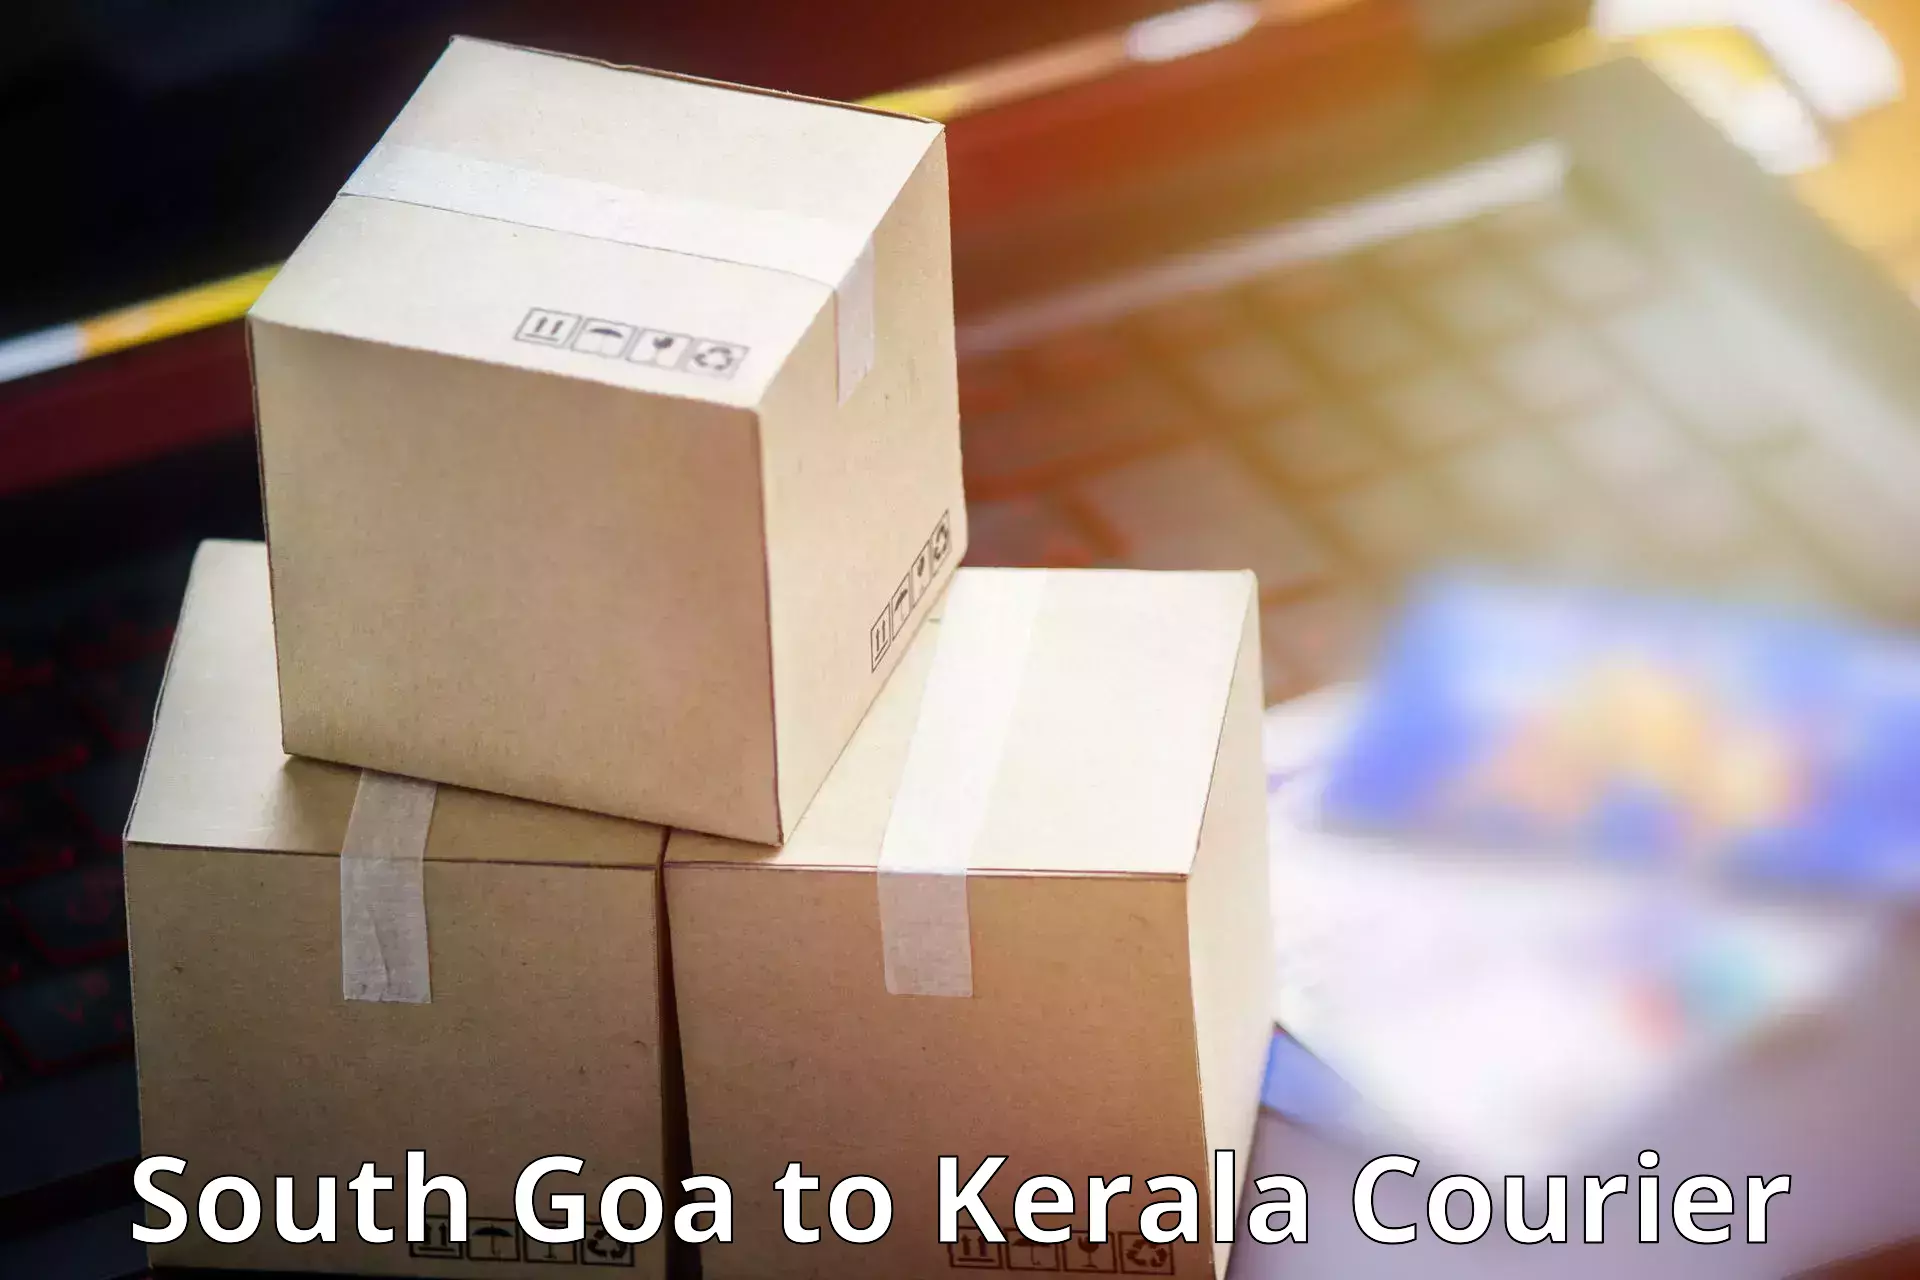 Cash on delivery service South Goa to Palai